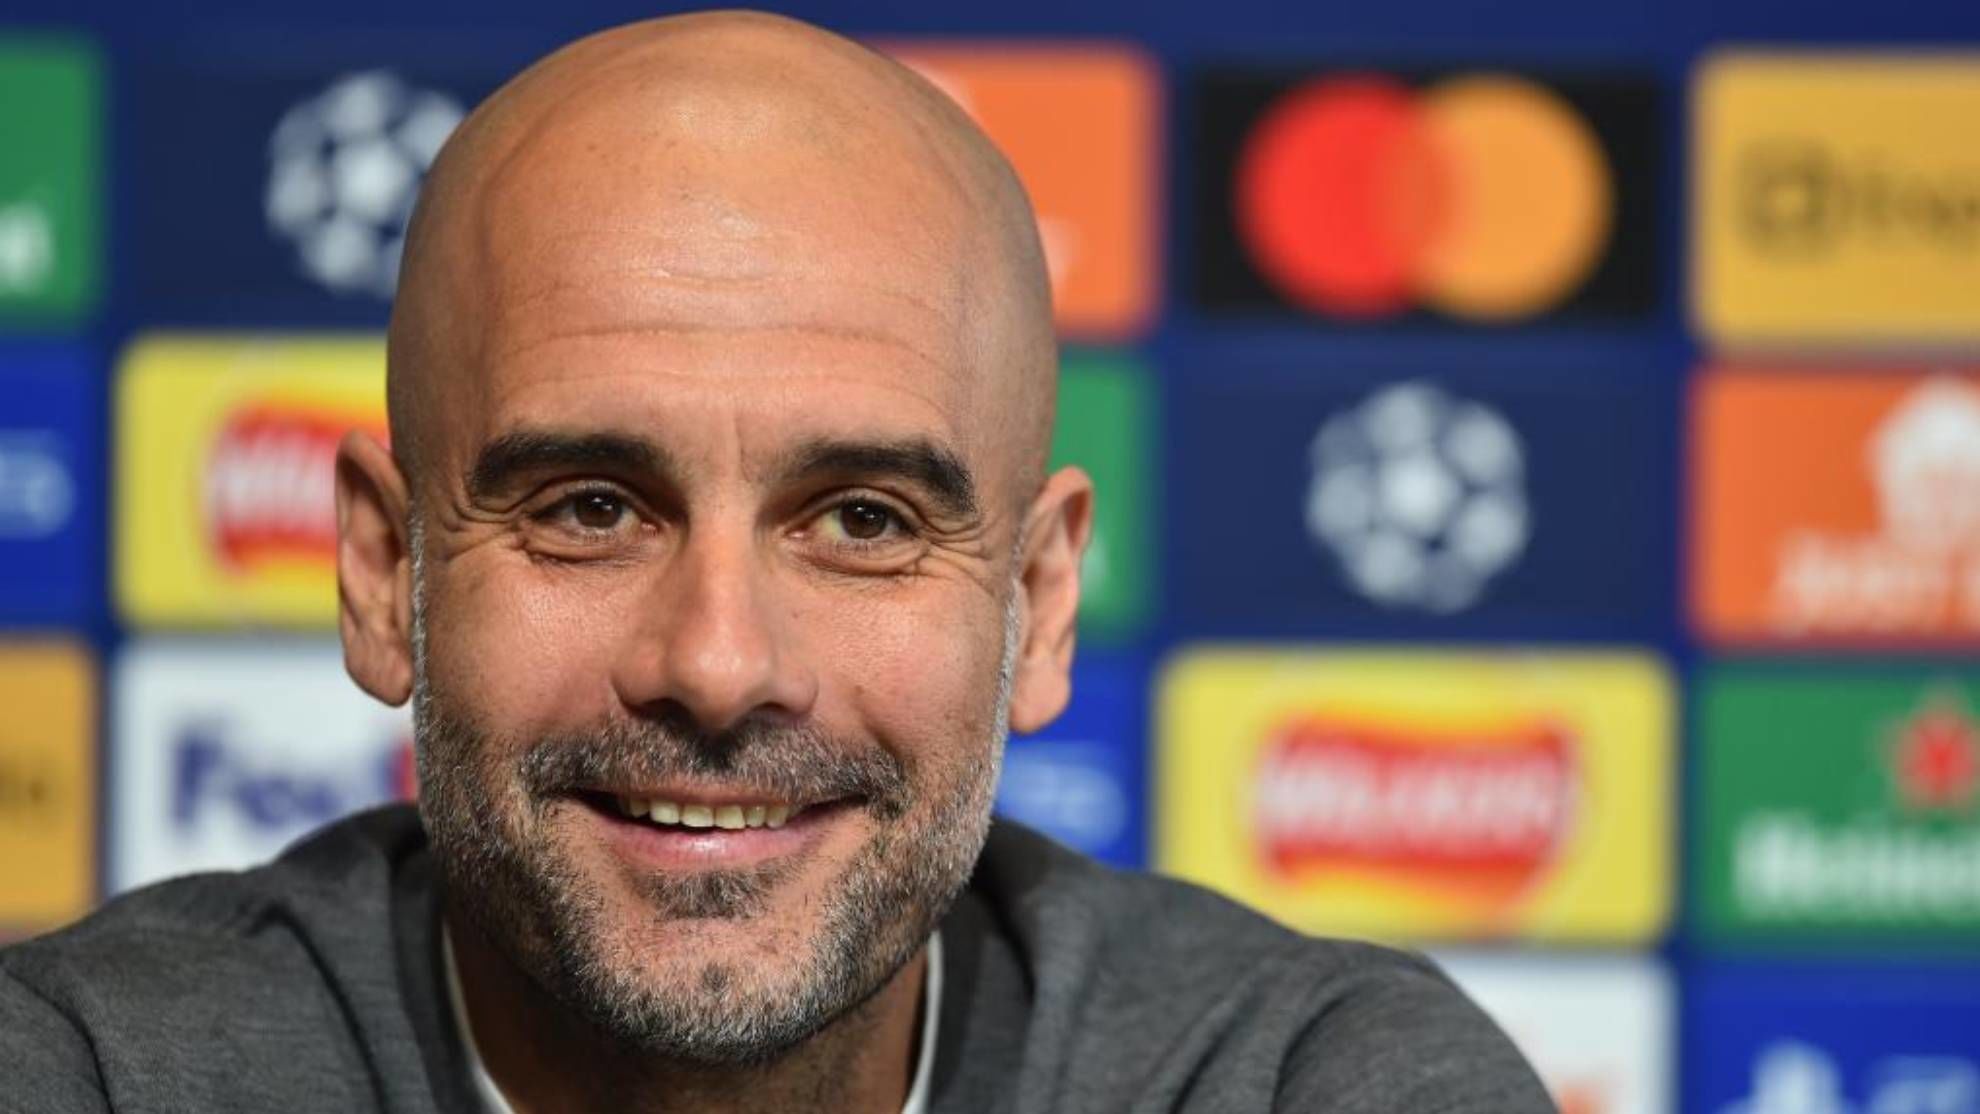 Guardiola: I want to stay at Manchester City, we haven't done anything wrong